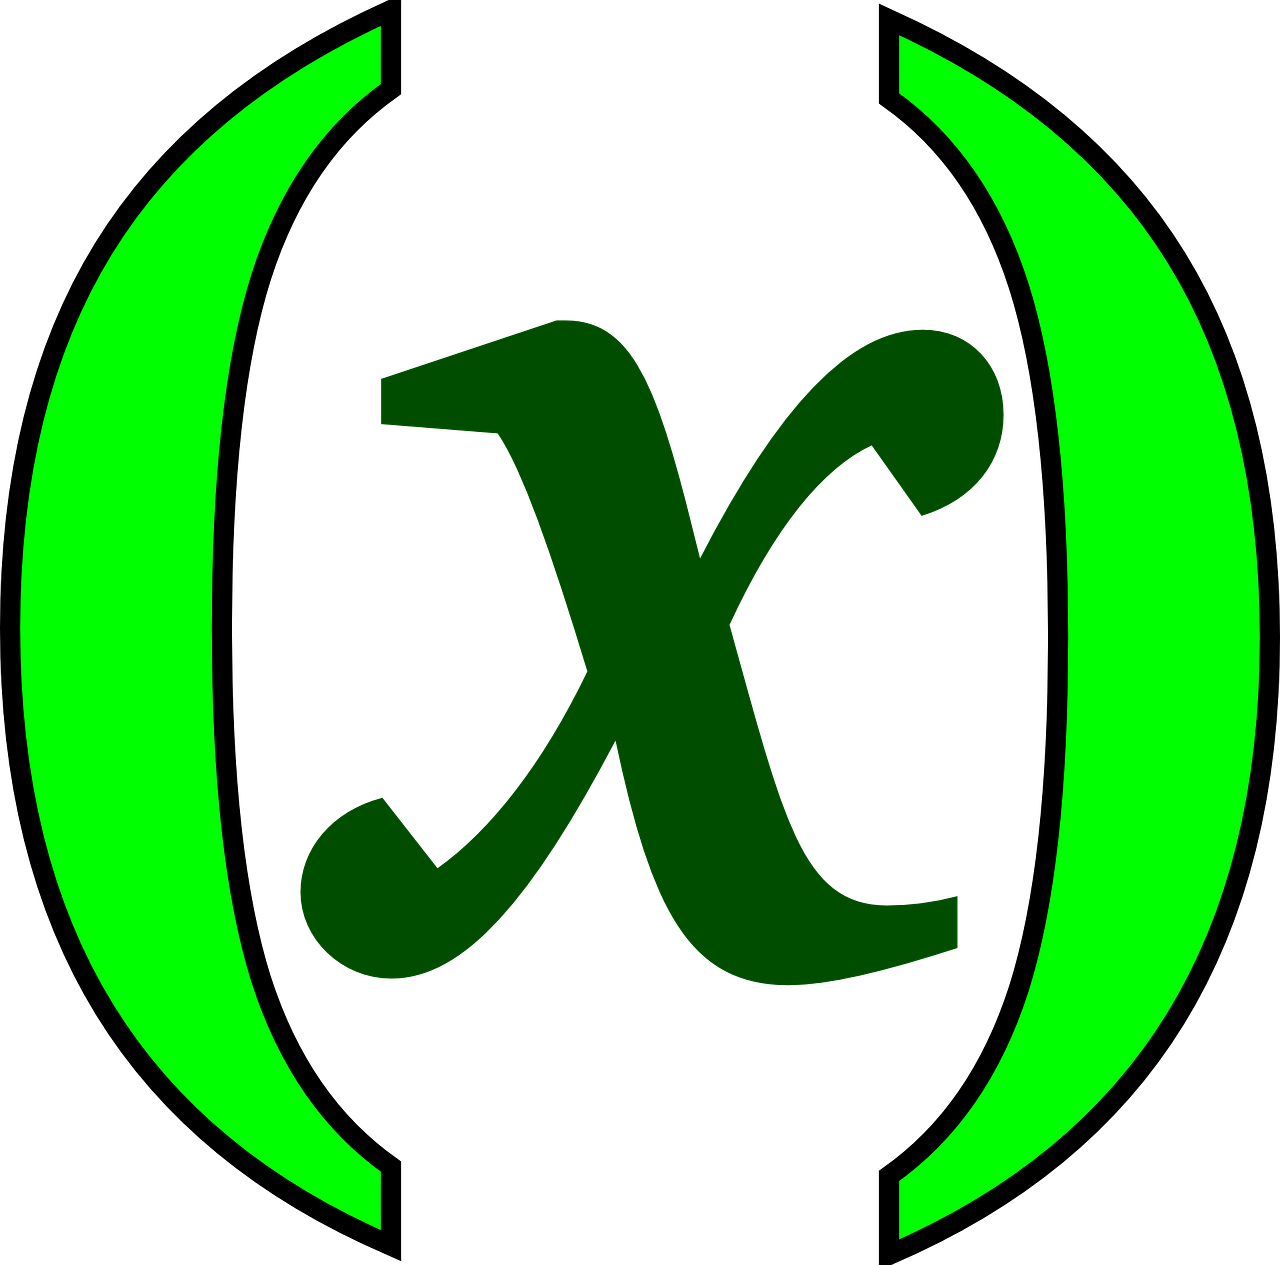 multiplication-parentheses-math-multiply-green-free-image-from